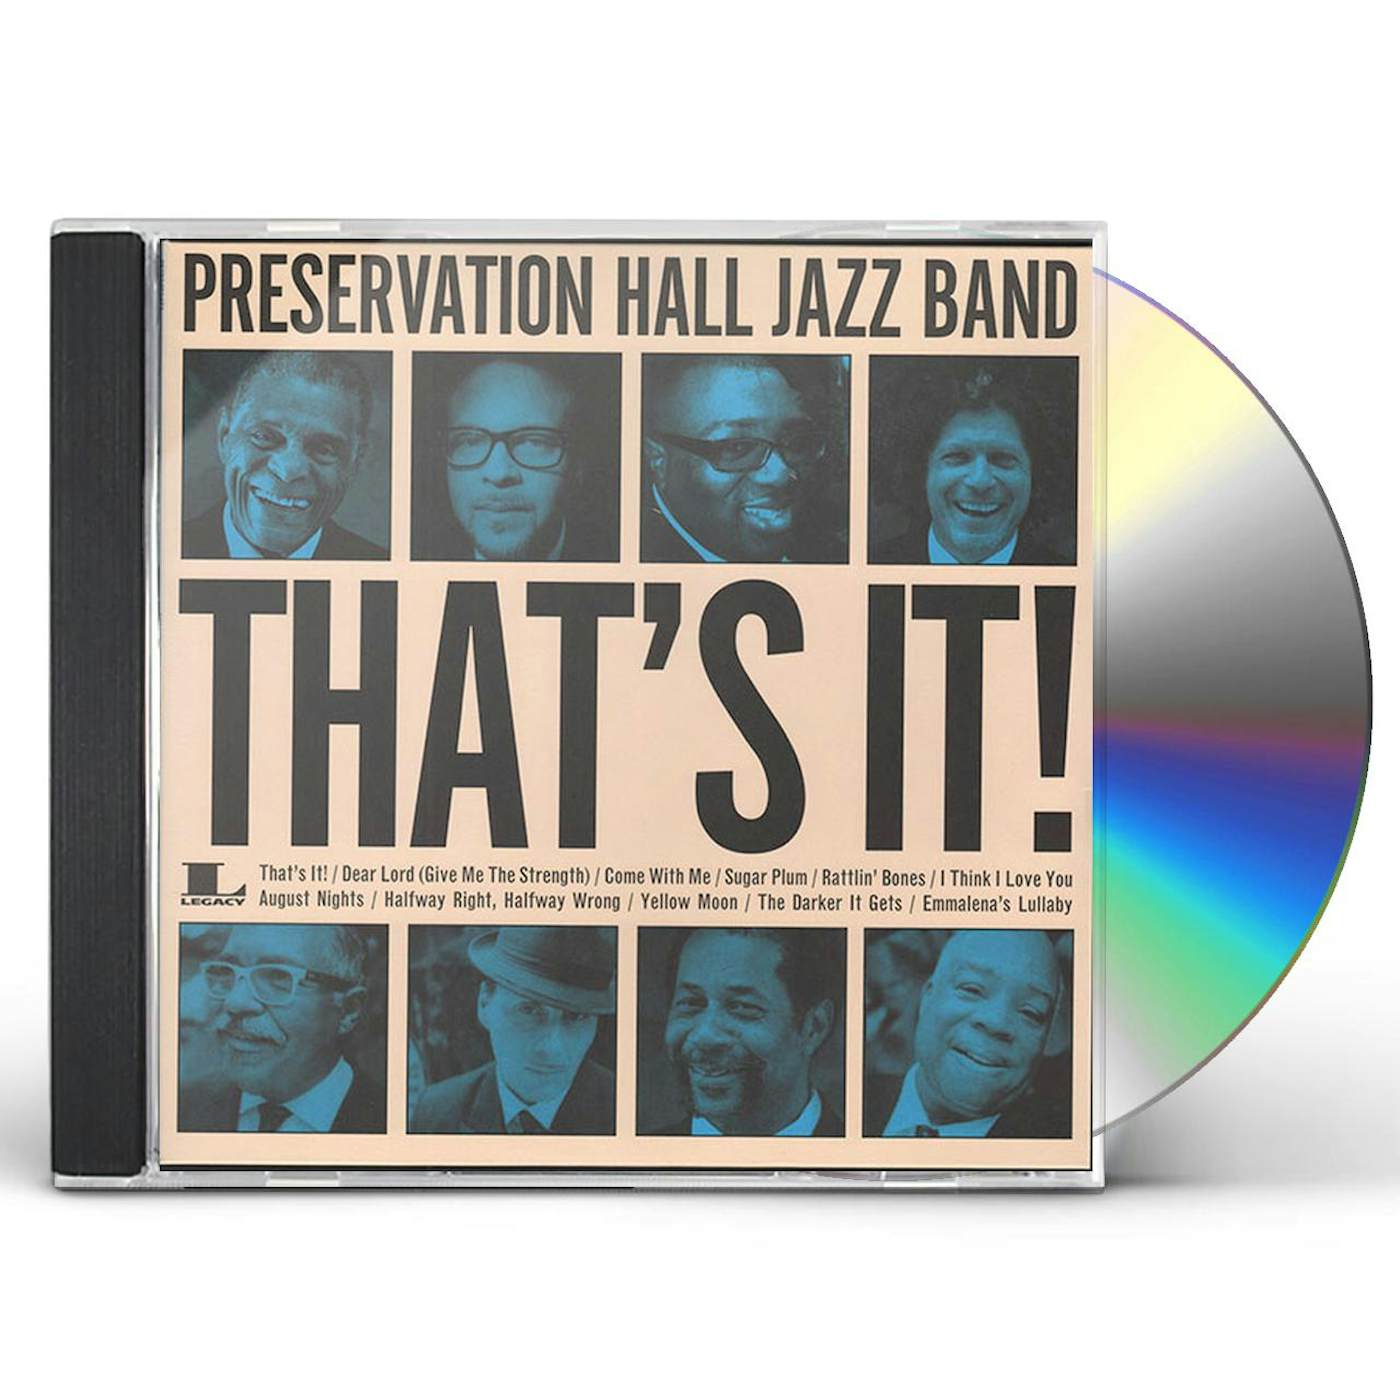 Preservation Hall Jazz Band THAT'S IT! CD